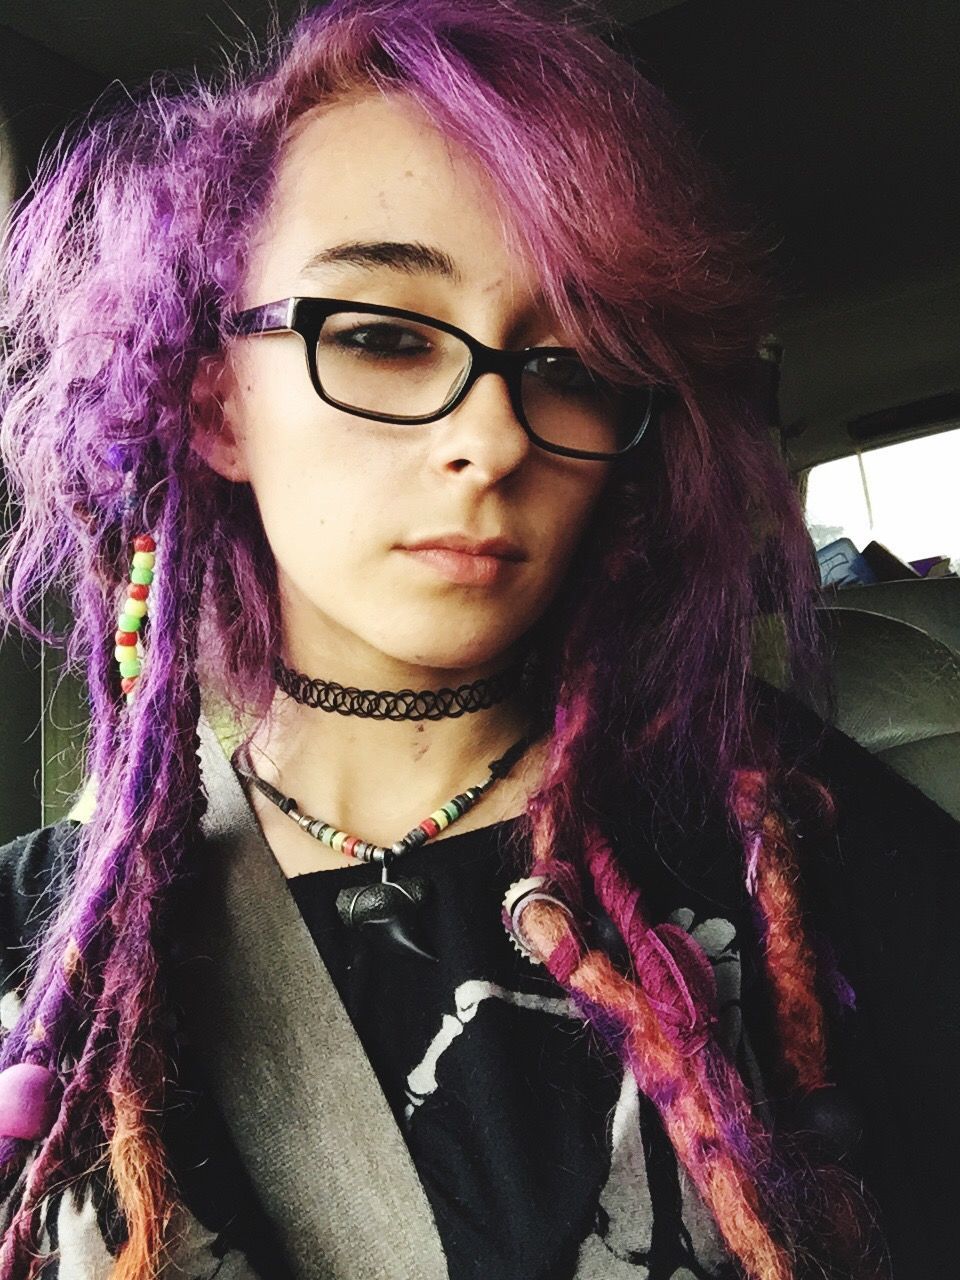 Low angle portrait of woman with dreadlock hair sitting in car